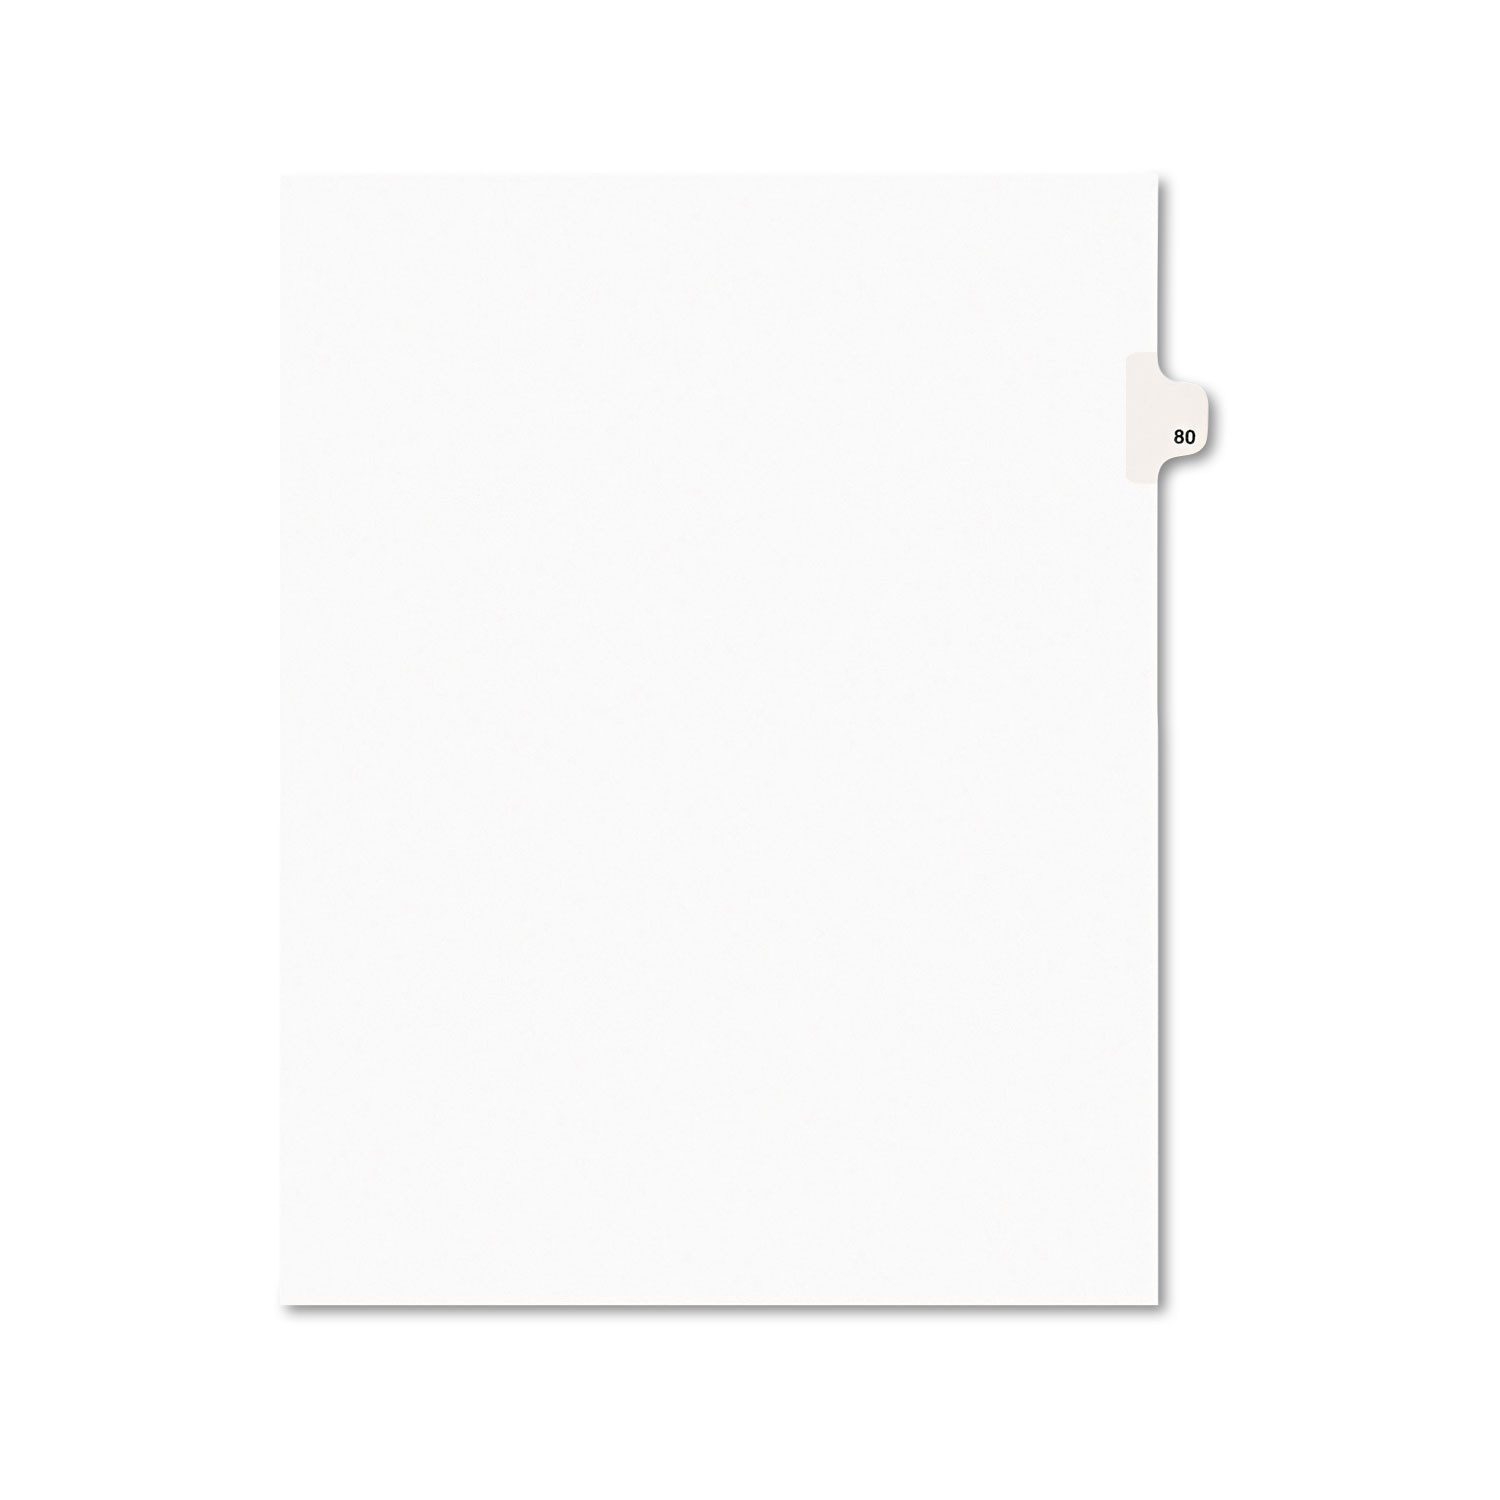  Avery 01080 Preprinted Legal Exhibit Side Tab Index Dividers, Avery Style, 10-Tab, 80, 11 x 8.5, White, 25/Pack (AVE01080) 